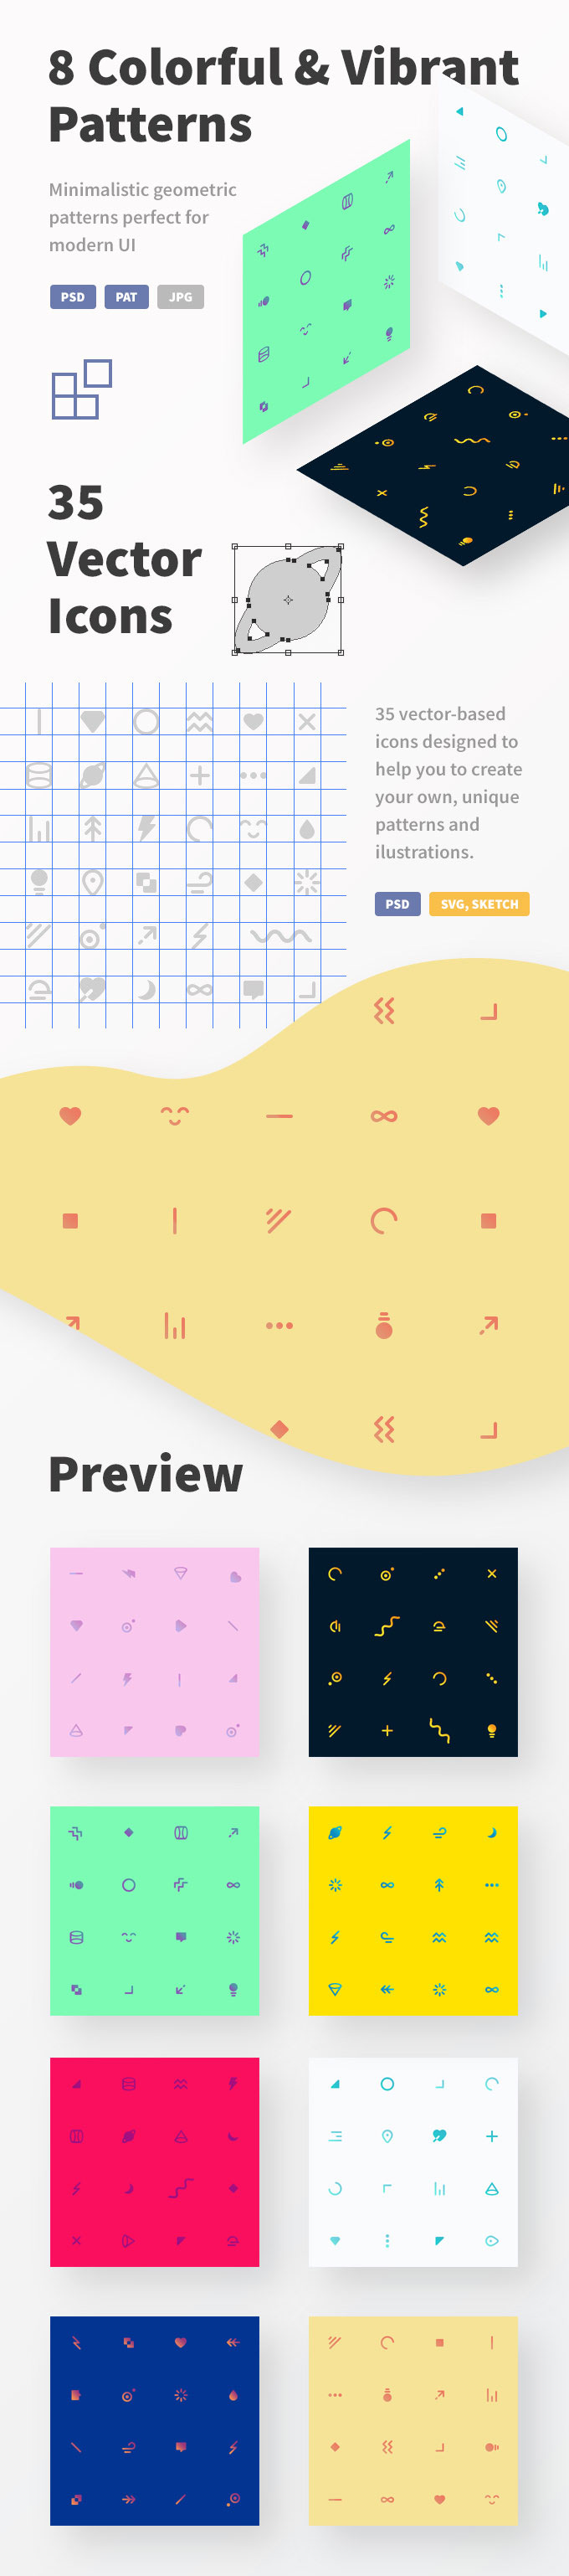 Download the Free Icons and UI Patterns Set